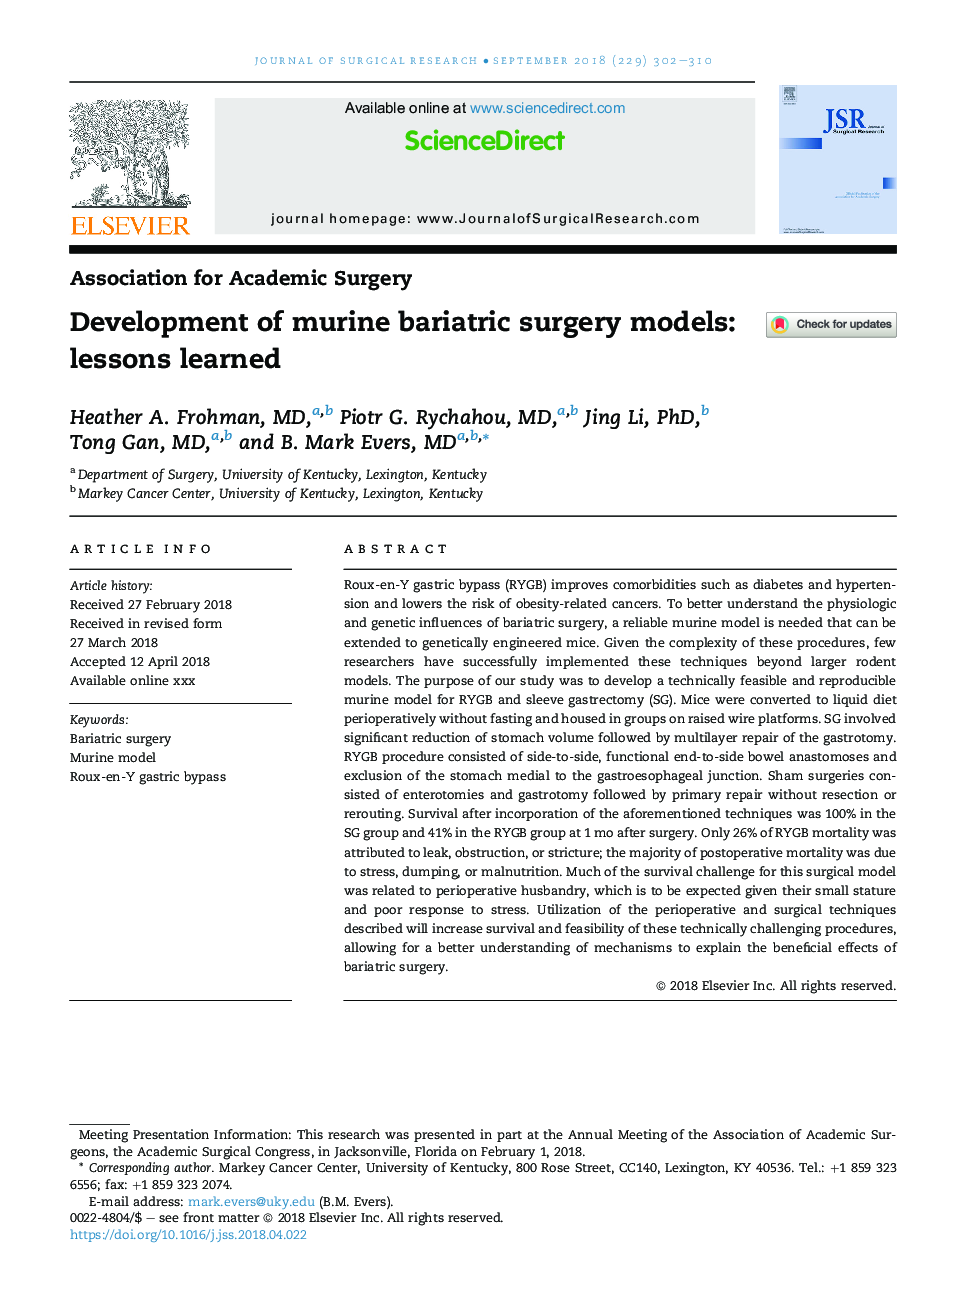 Development of murine bariatric surgery models: lessons learned